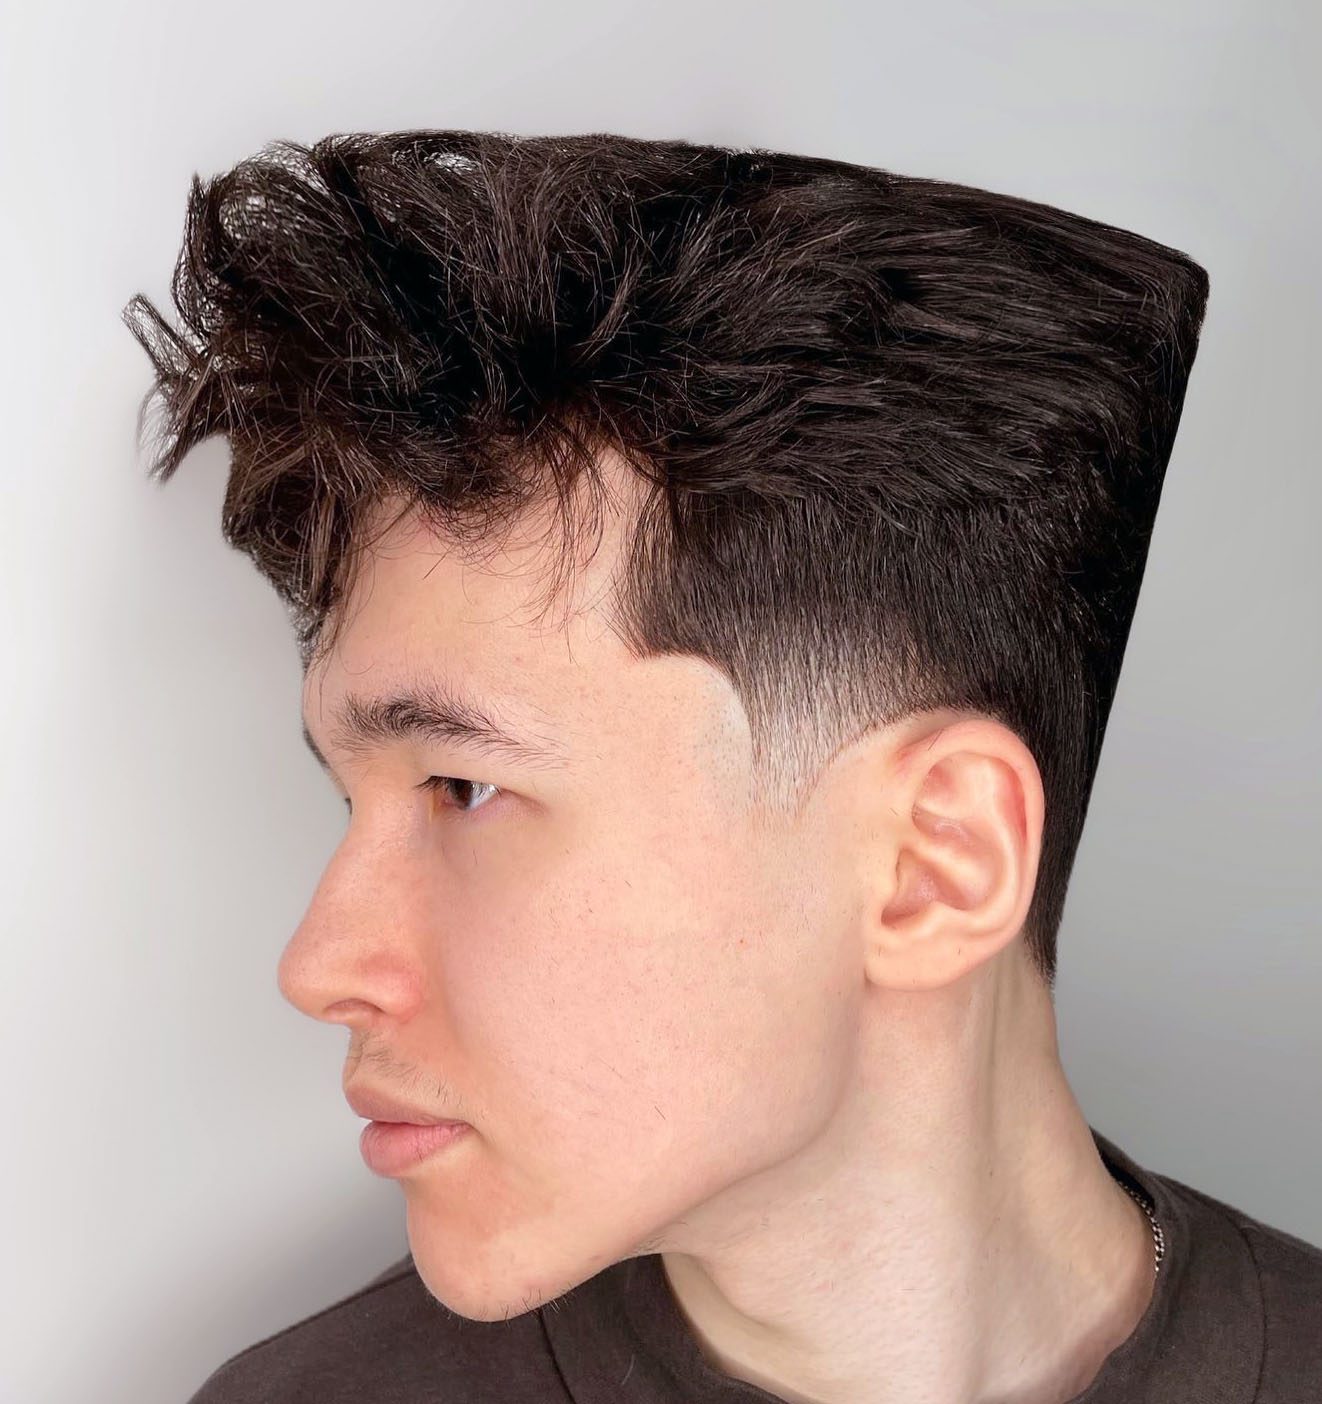 Styled Upright Flat Top